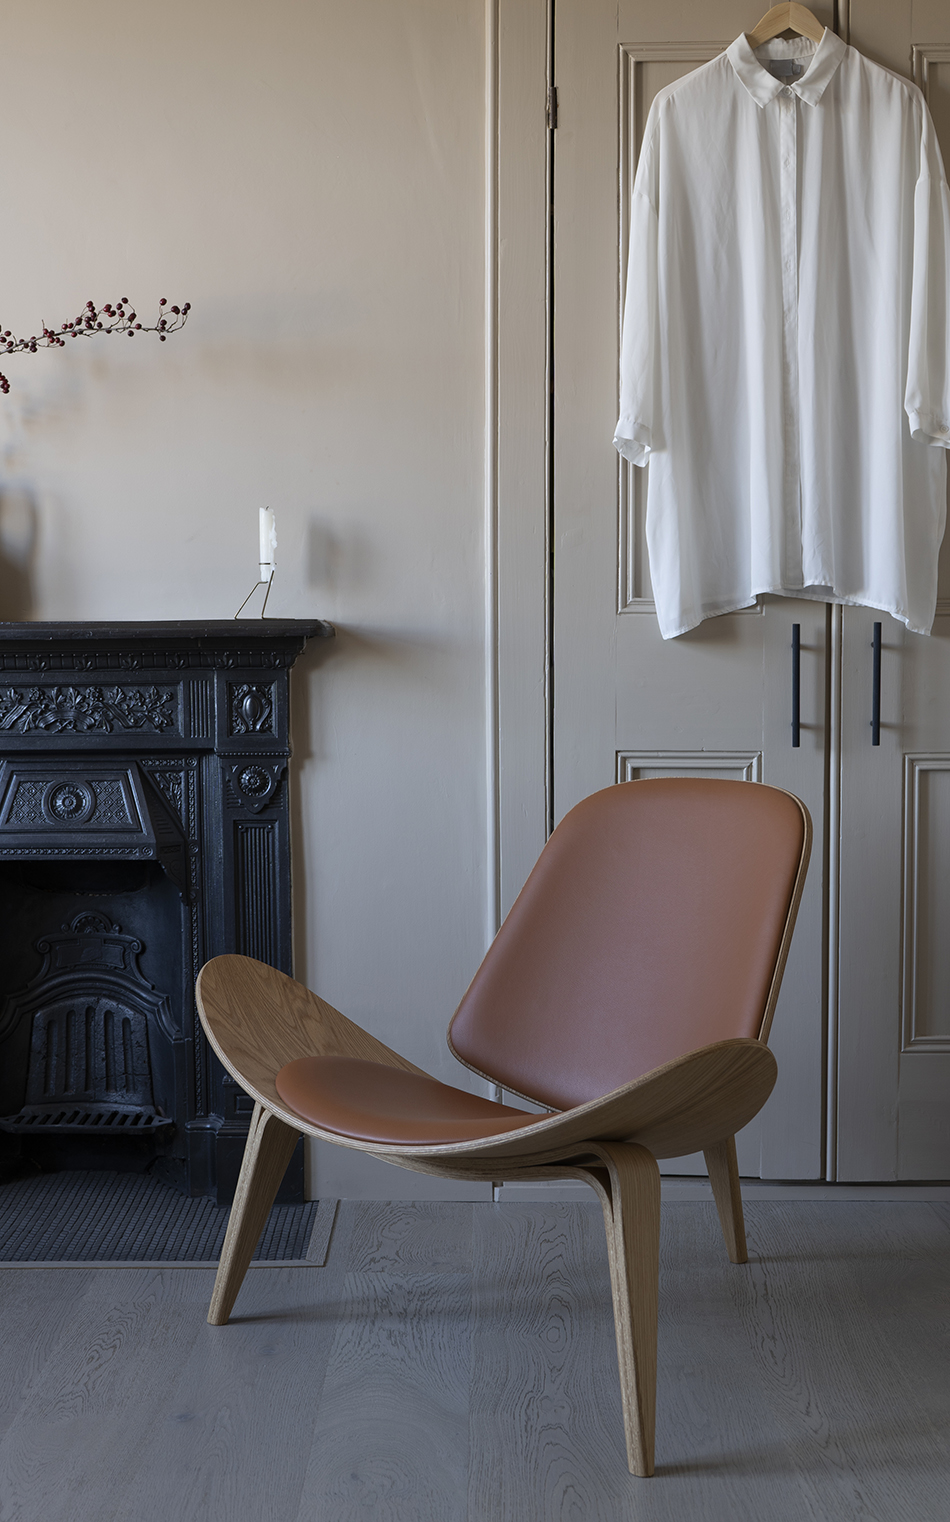 The Timeless Appeal of the Shell Chair: A
Design Classic